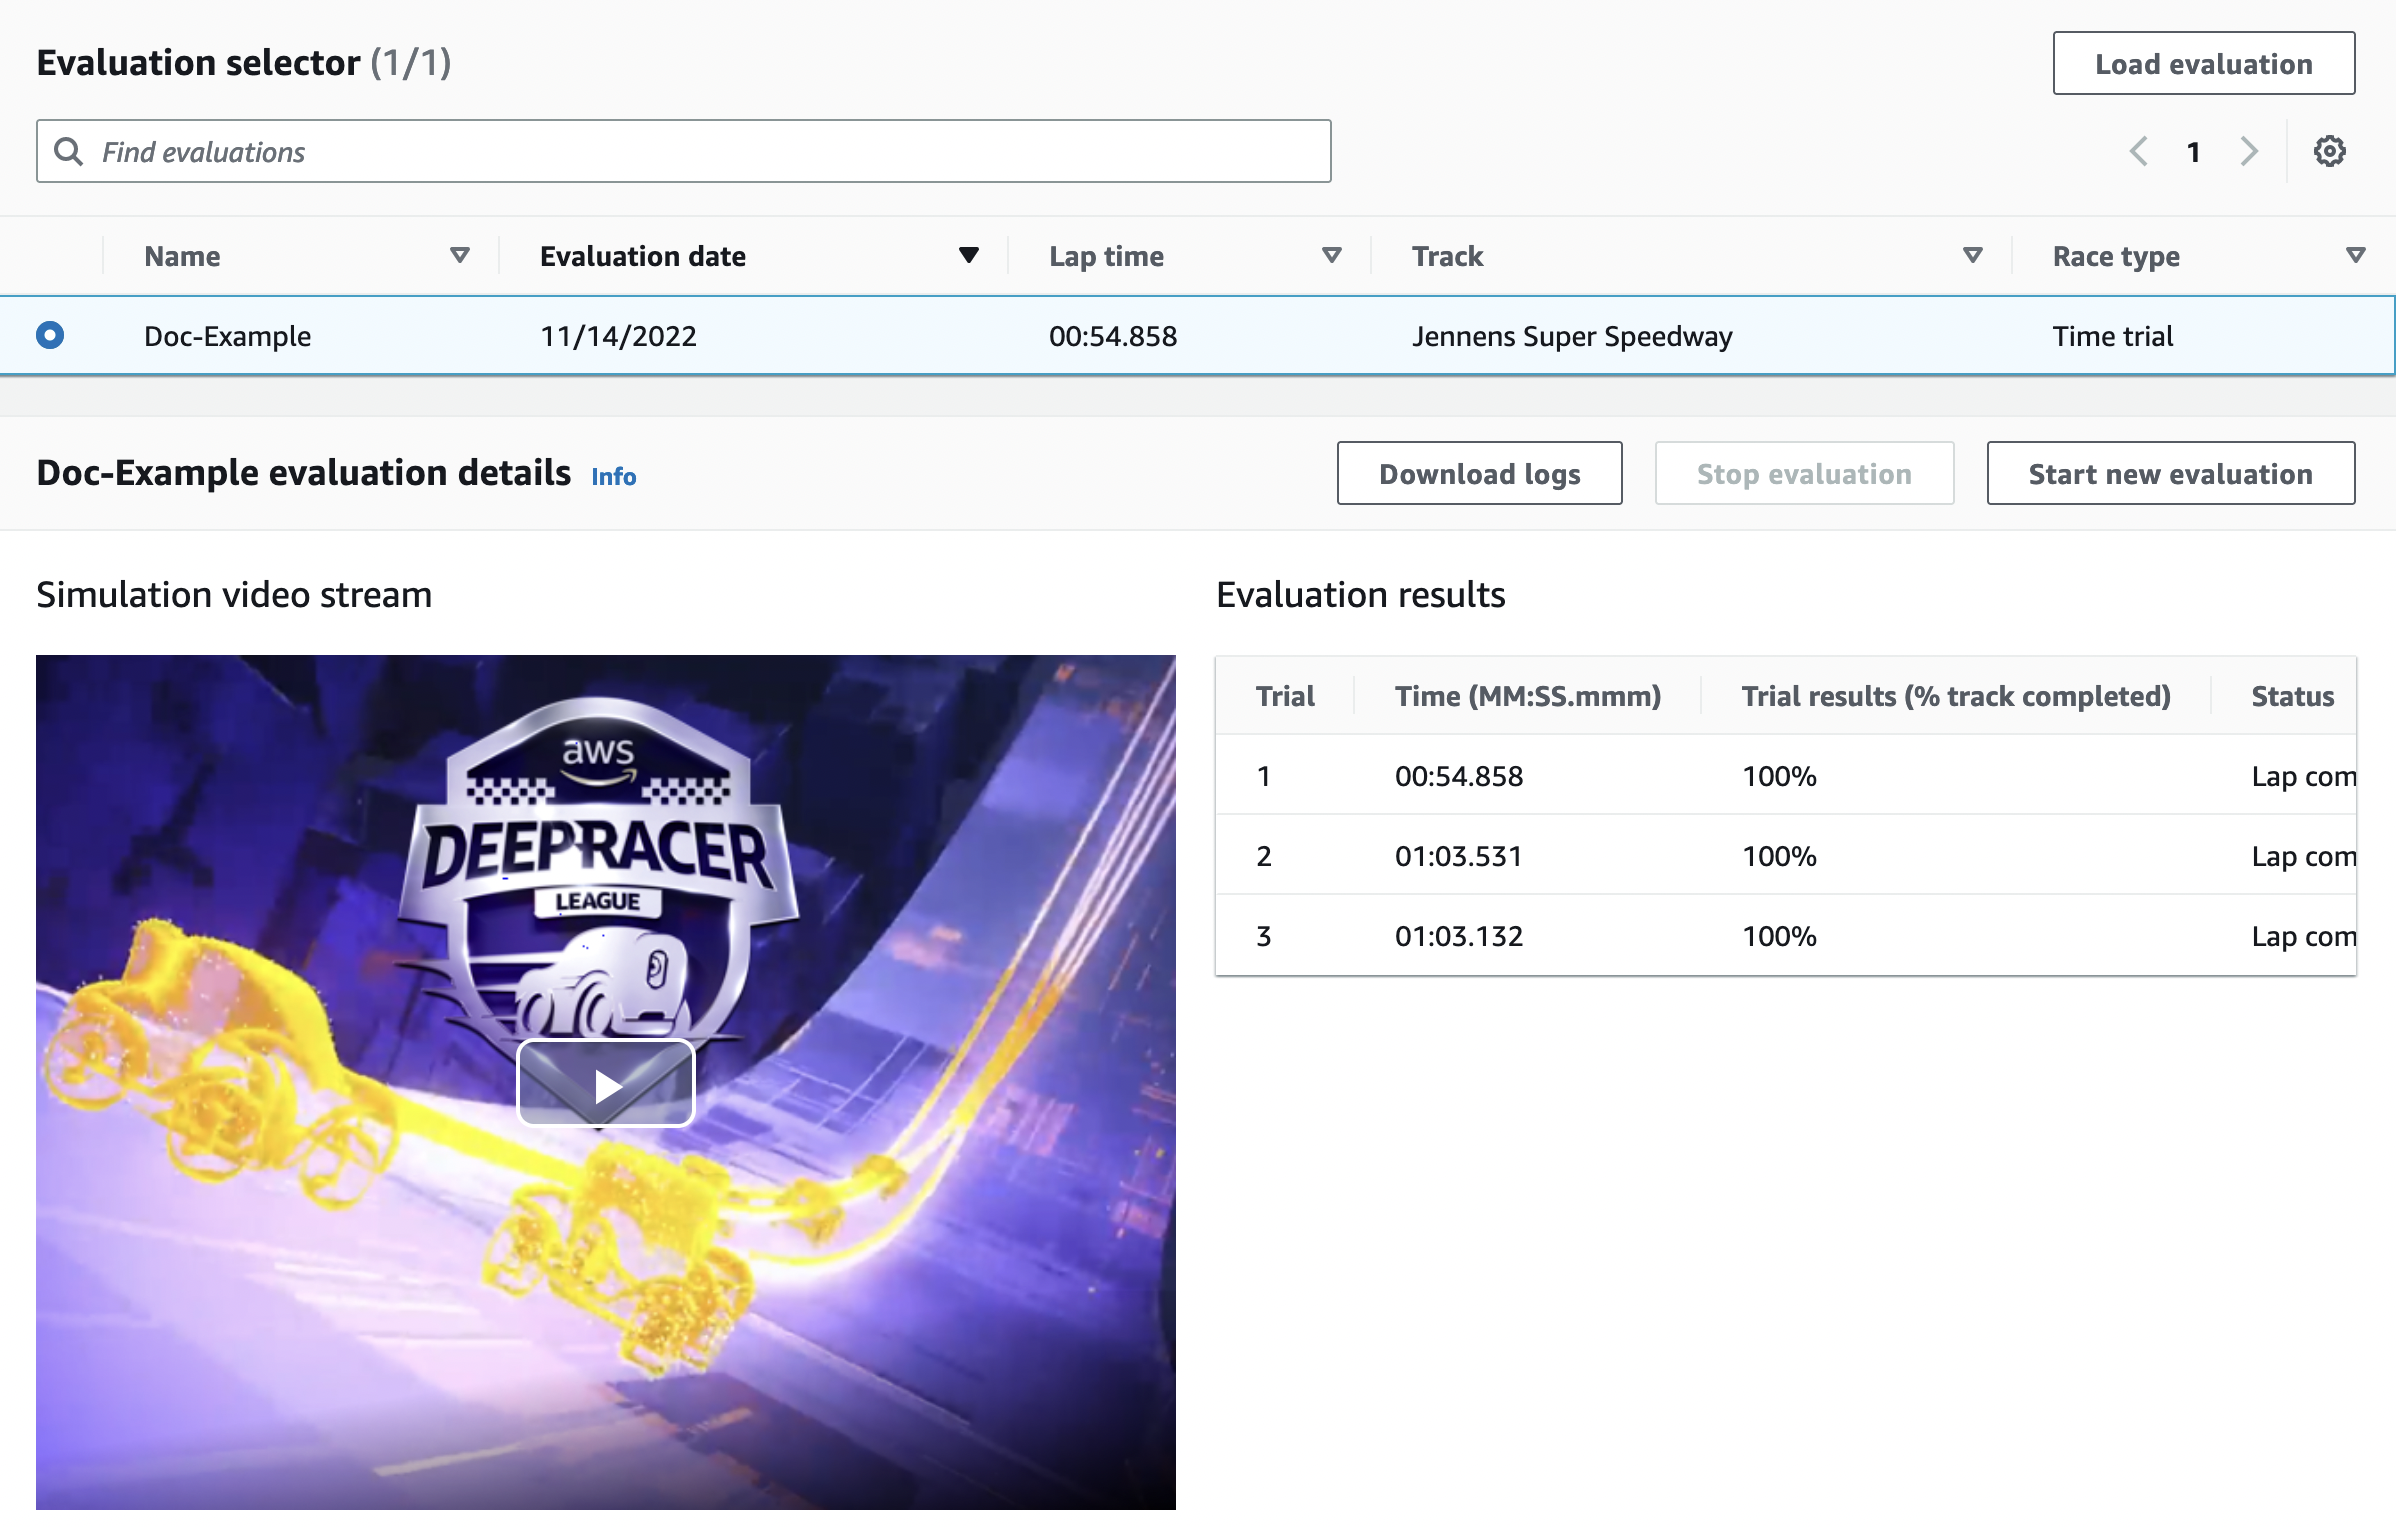 
                    Image: AWS DeepRacer evaluation performance completed.
                